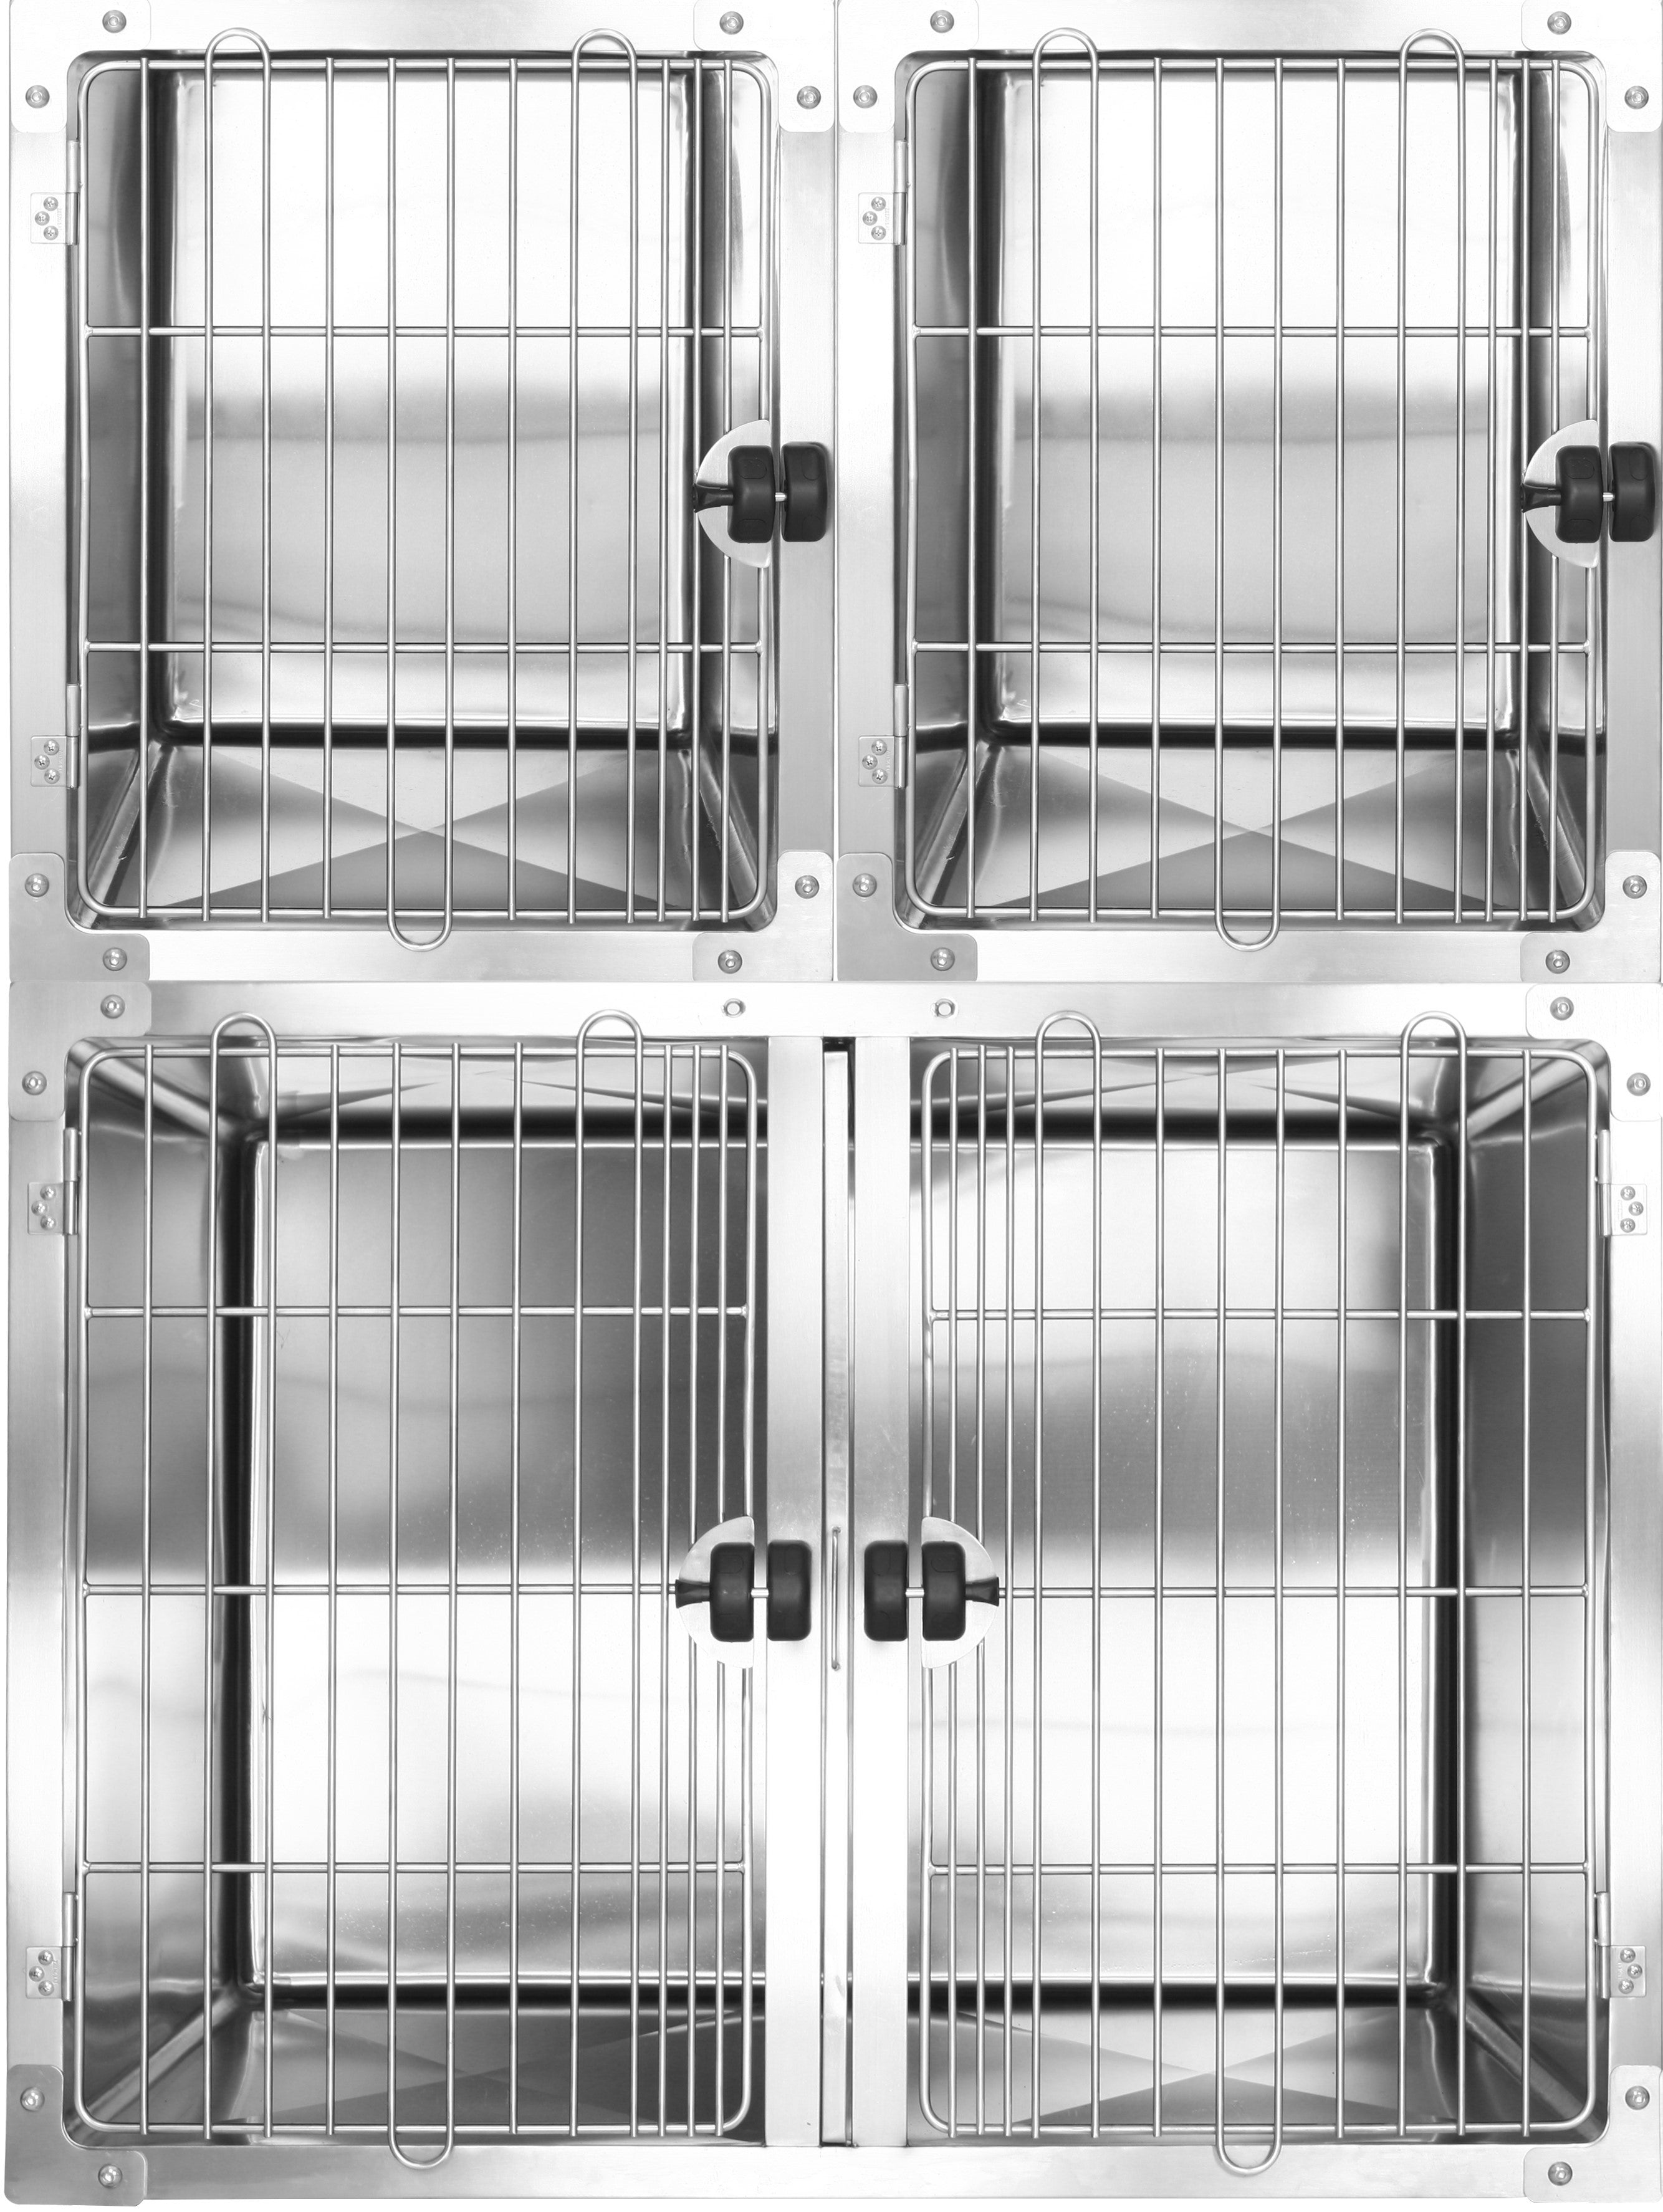 Aeolus Stainless Steel Round Corner Modular Cage-Two-Tier (1L + 2M) with drainage system